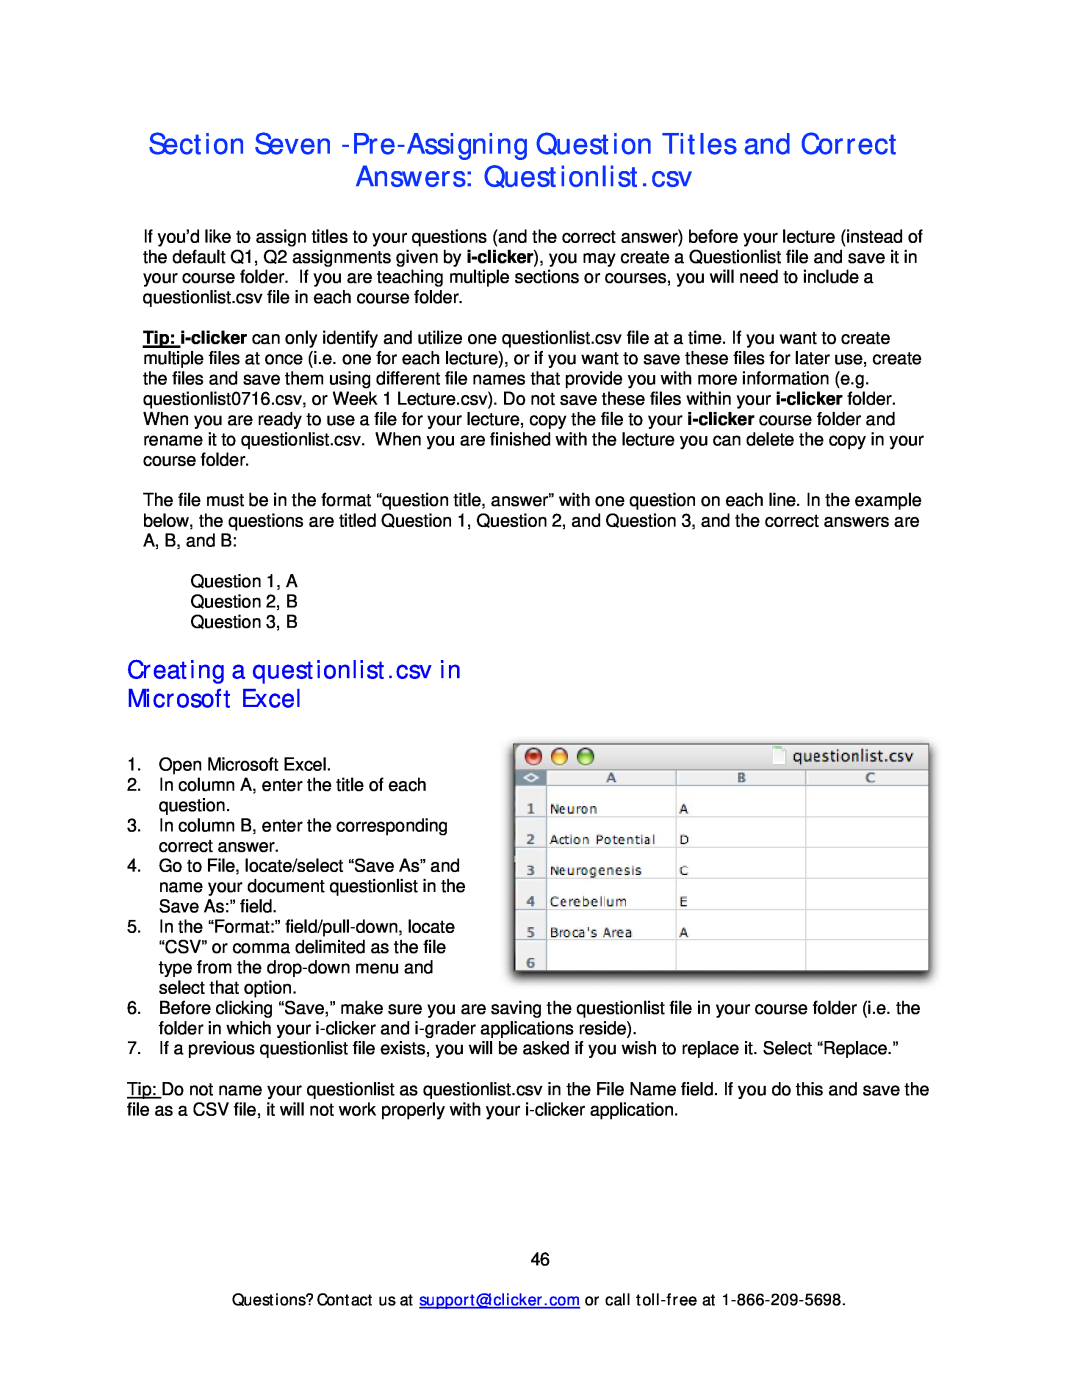 Apple Mouse manual Creating a questionlist.csv in Microsoft Excel, Section Seven -Pre-Assigning Question Titles and Correct 